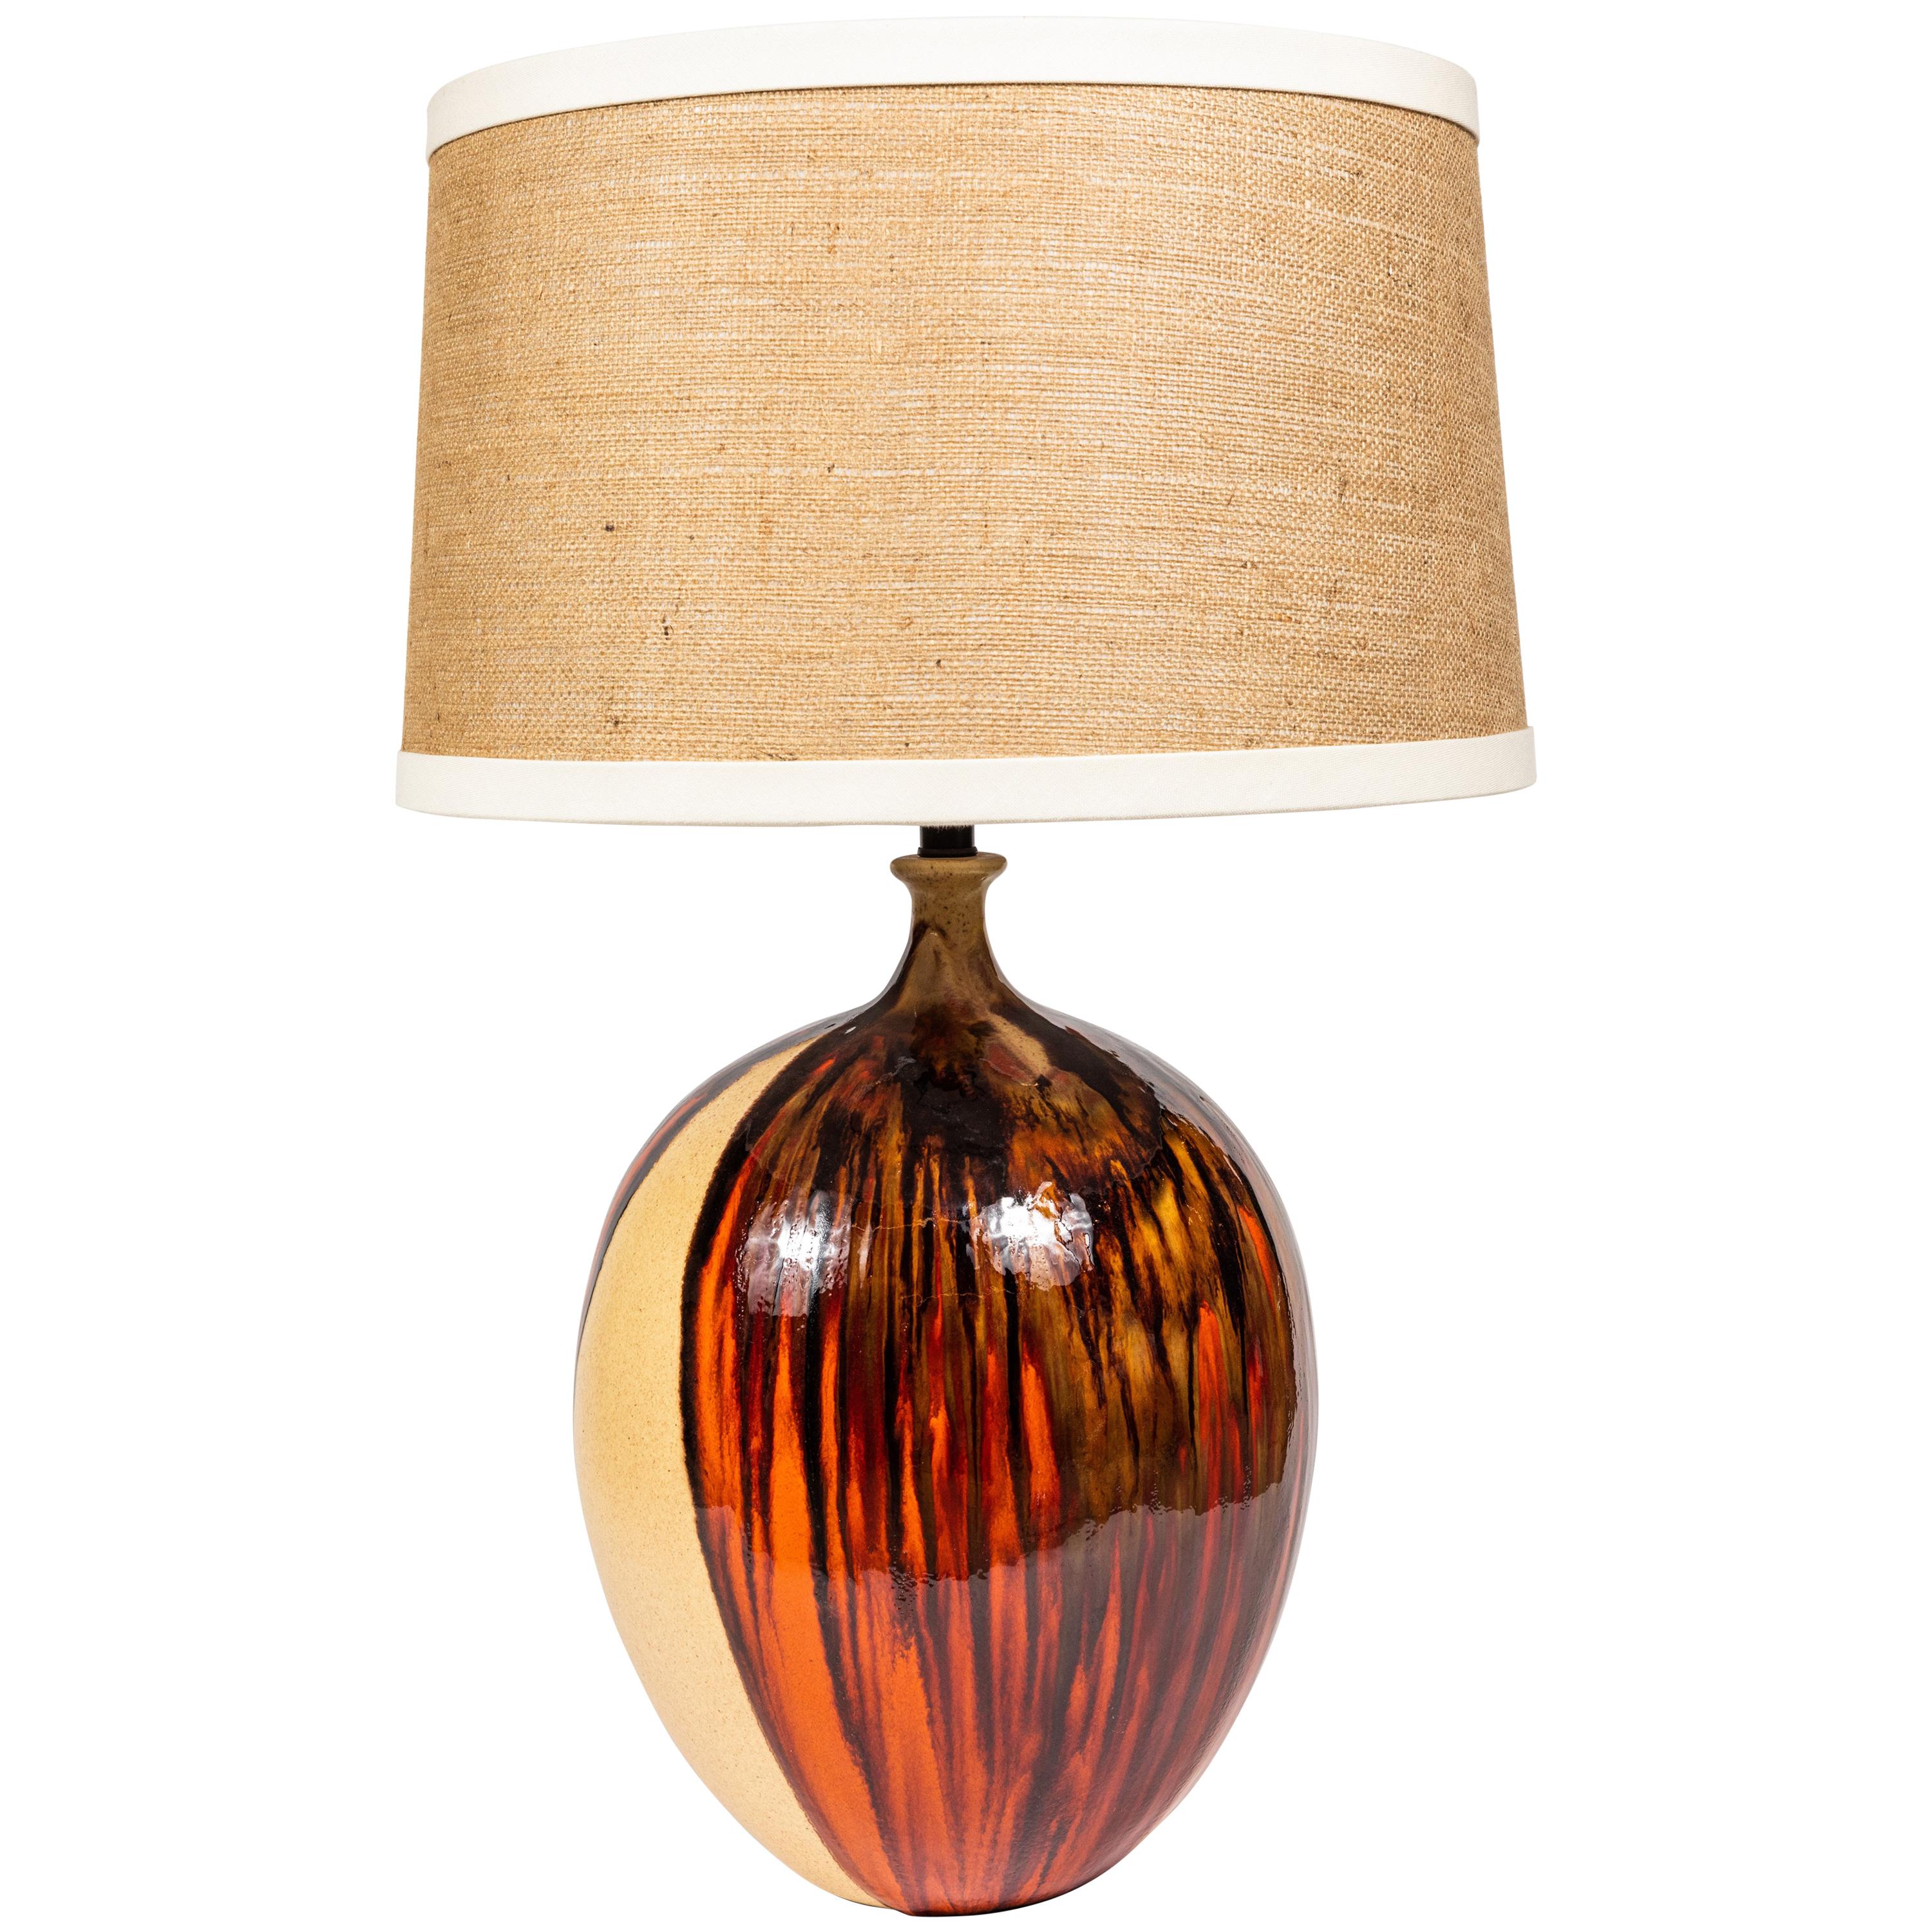 Midcentury Ceramic Lamp in Drip Glaze in Browns and Orange with Custom Shade